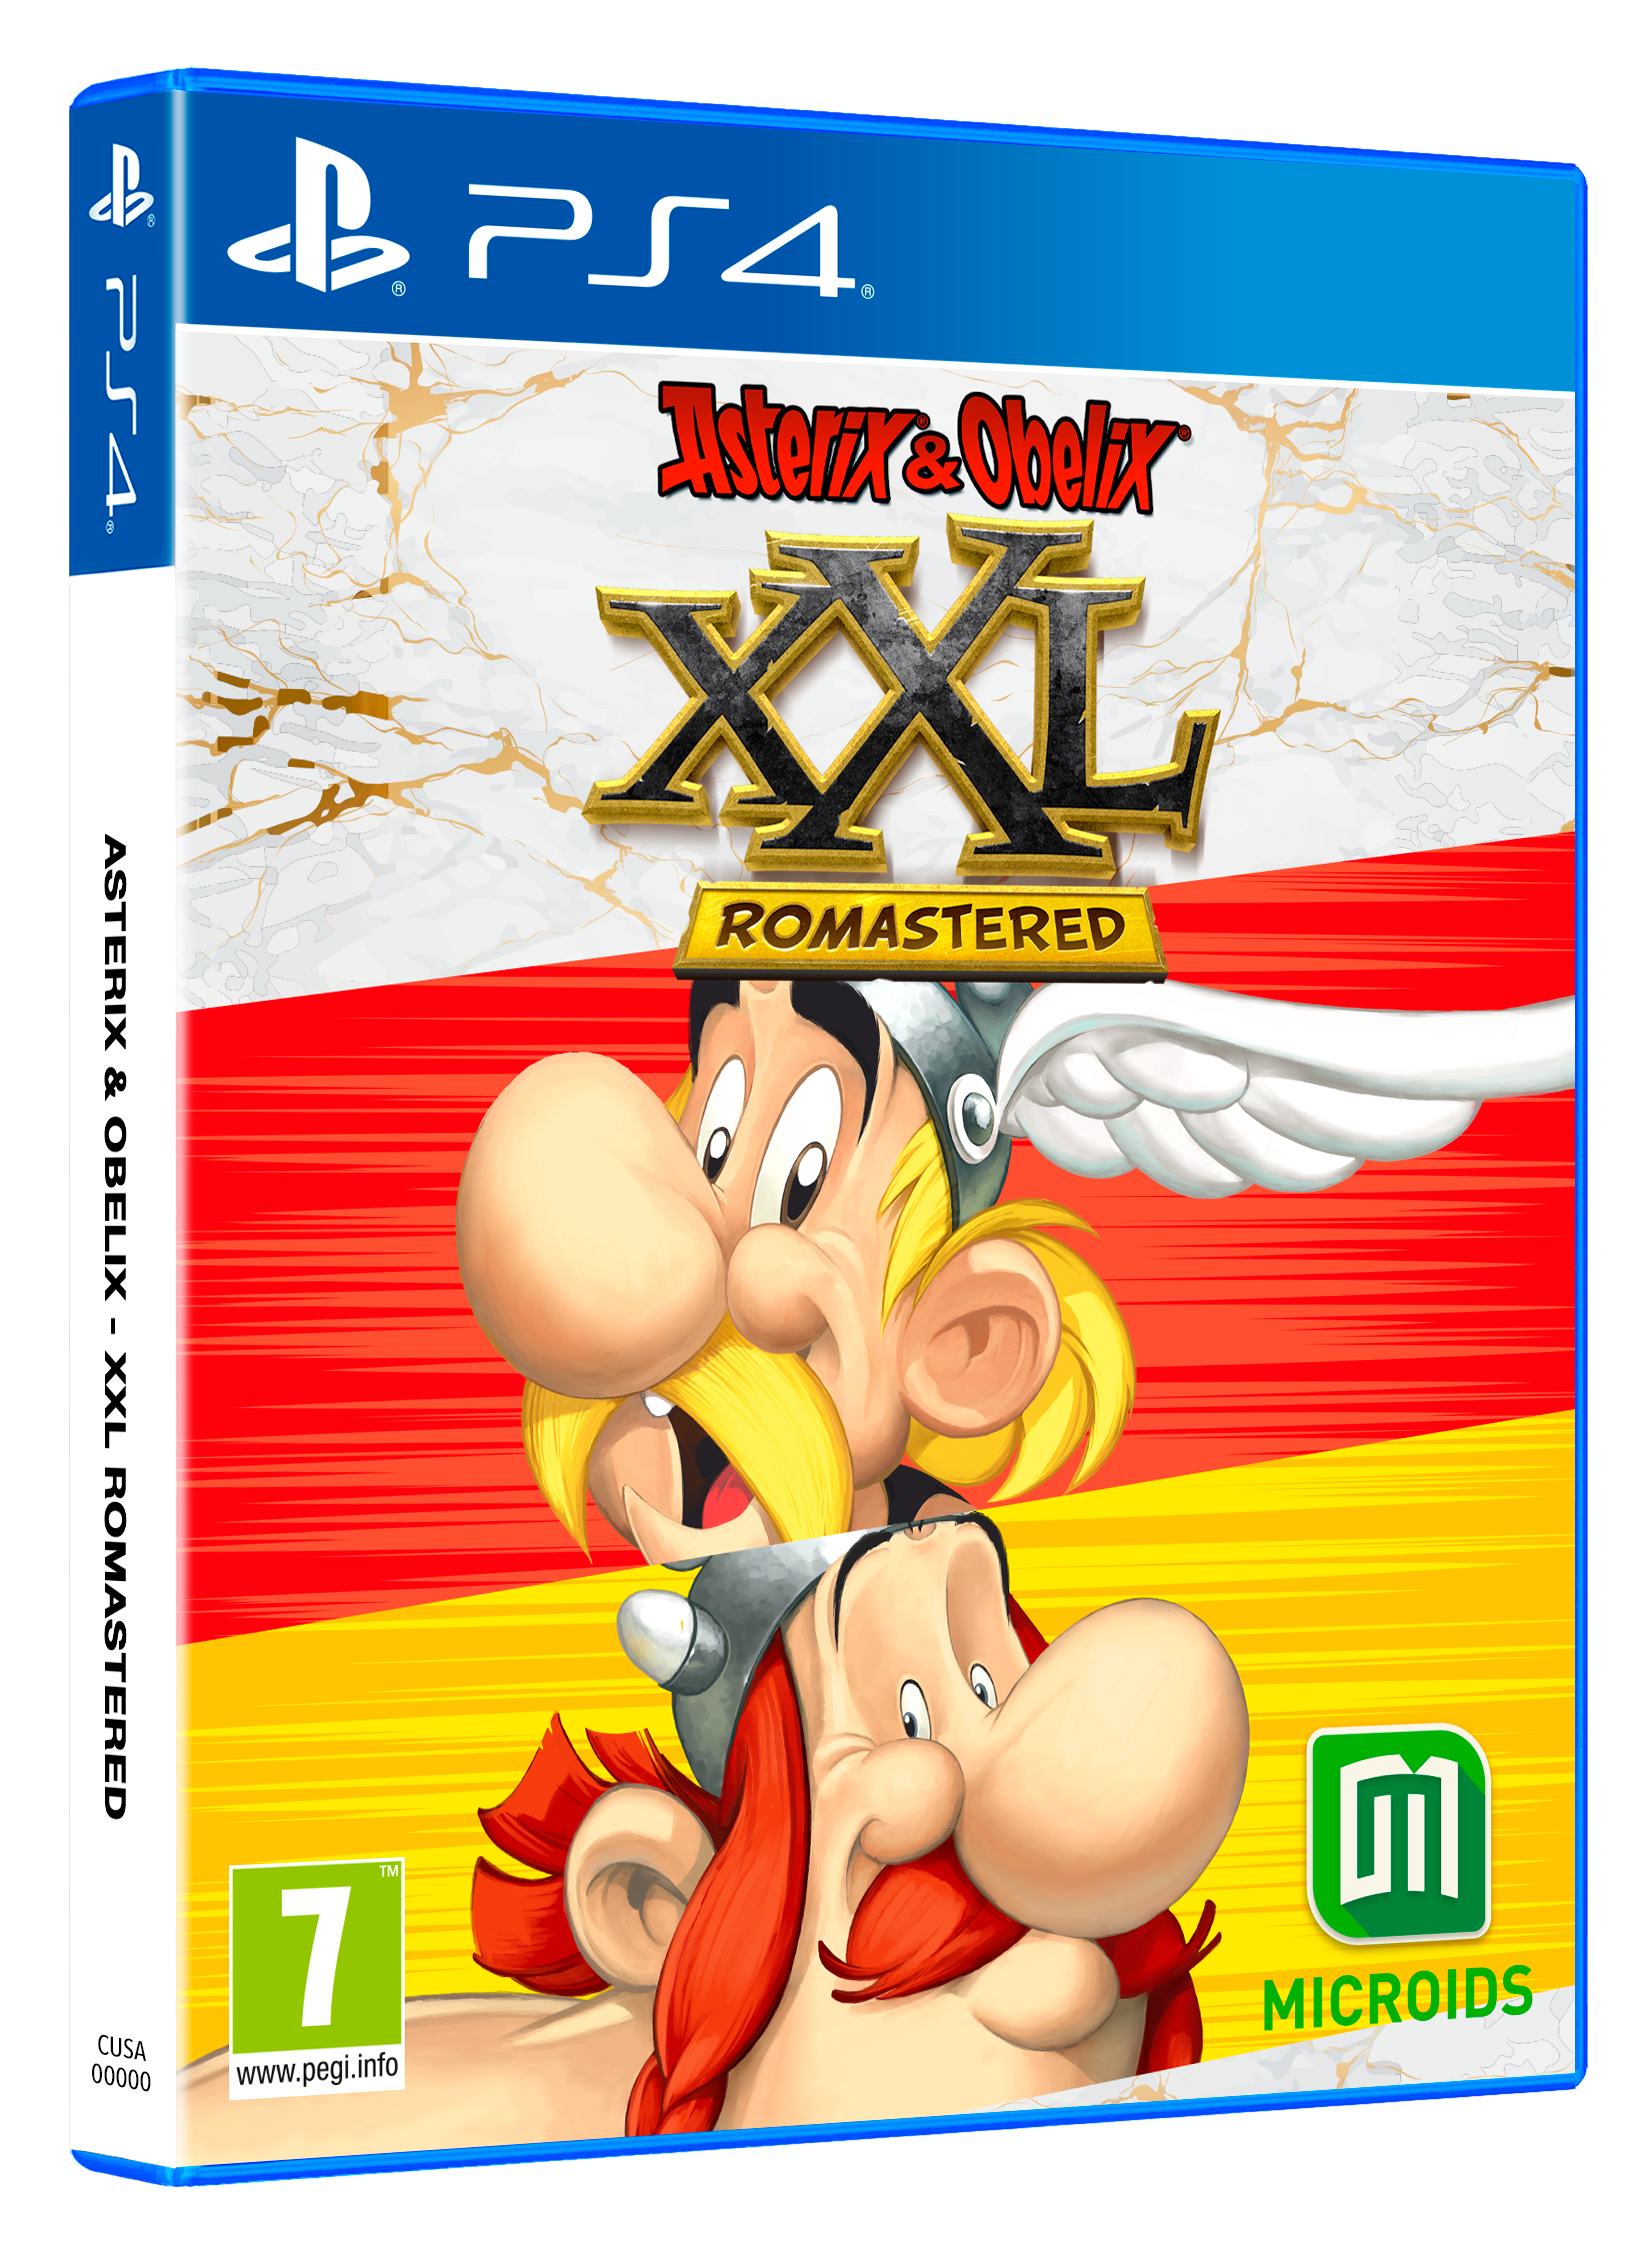 Asterix & Obelix XXL - Romastered (PS4)Microids